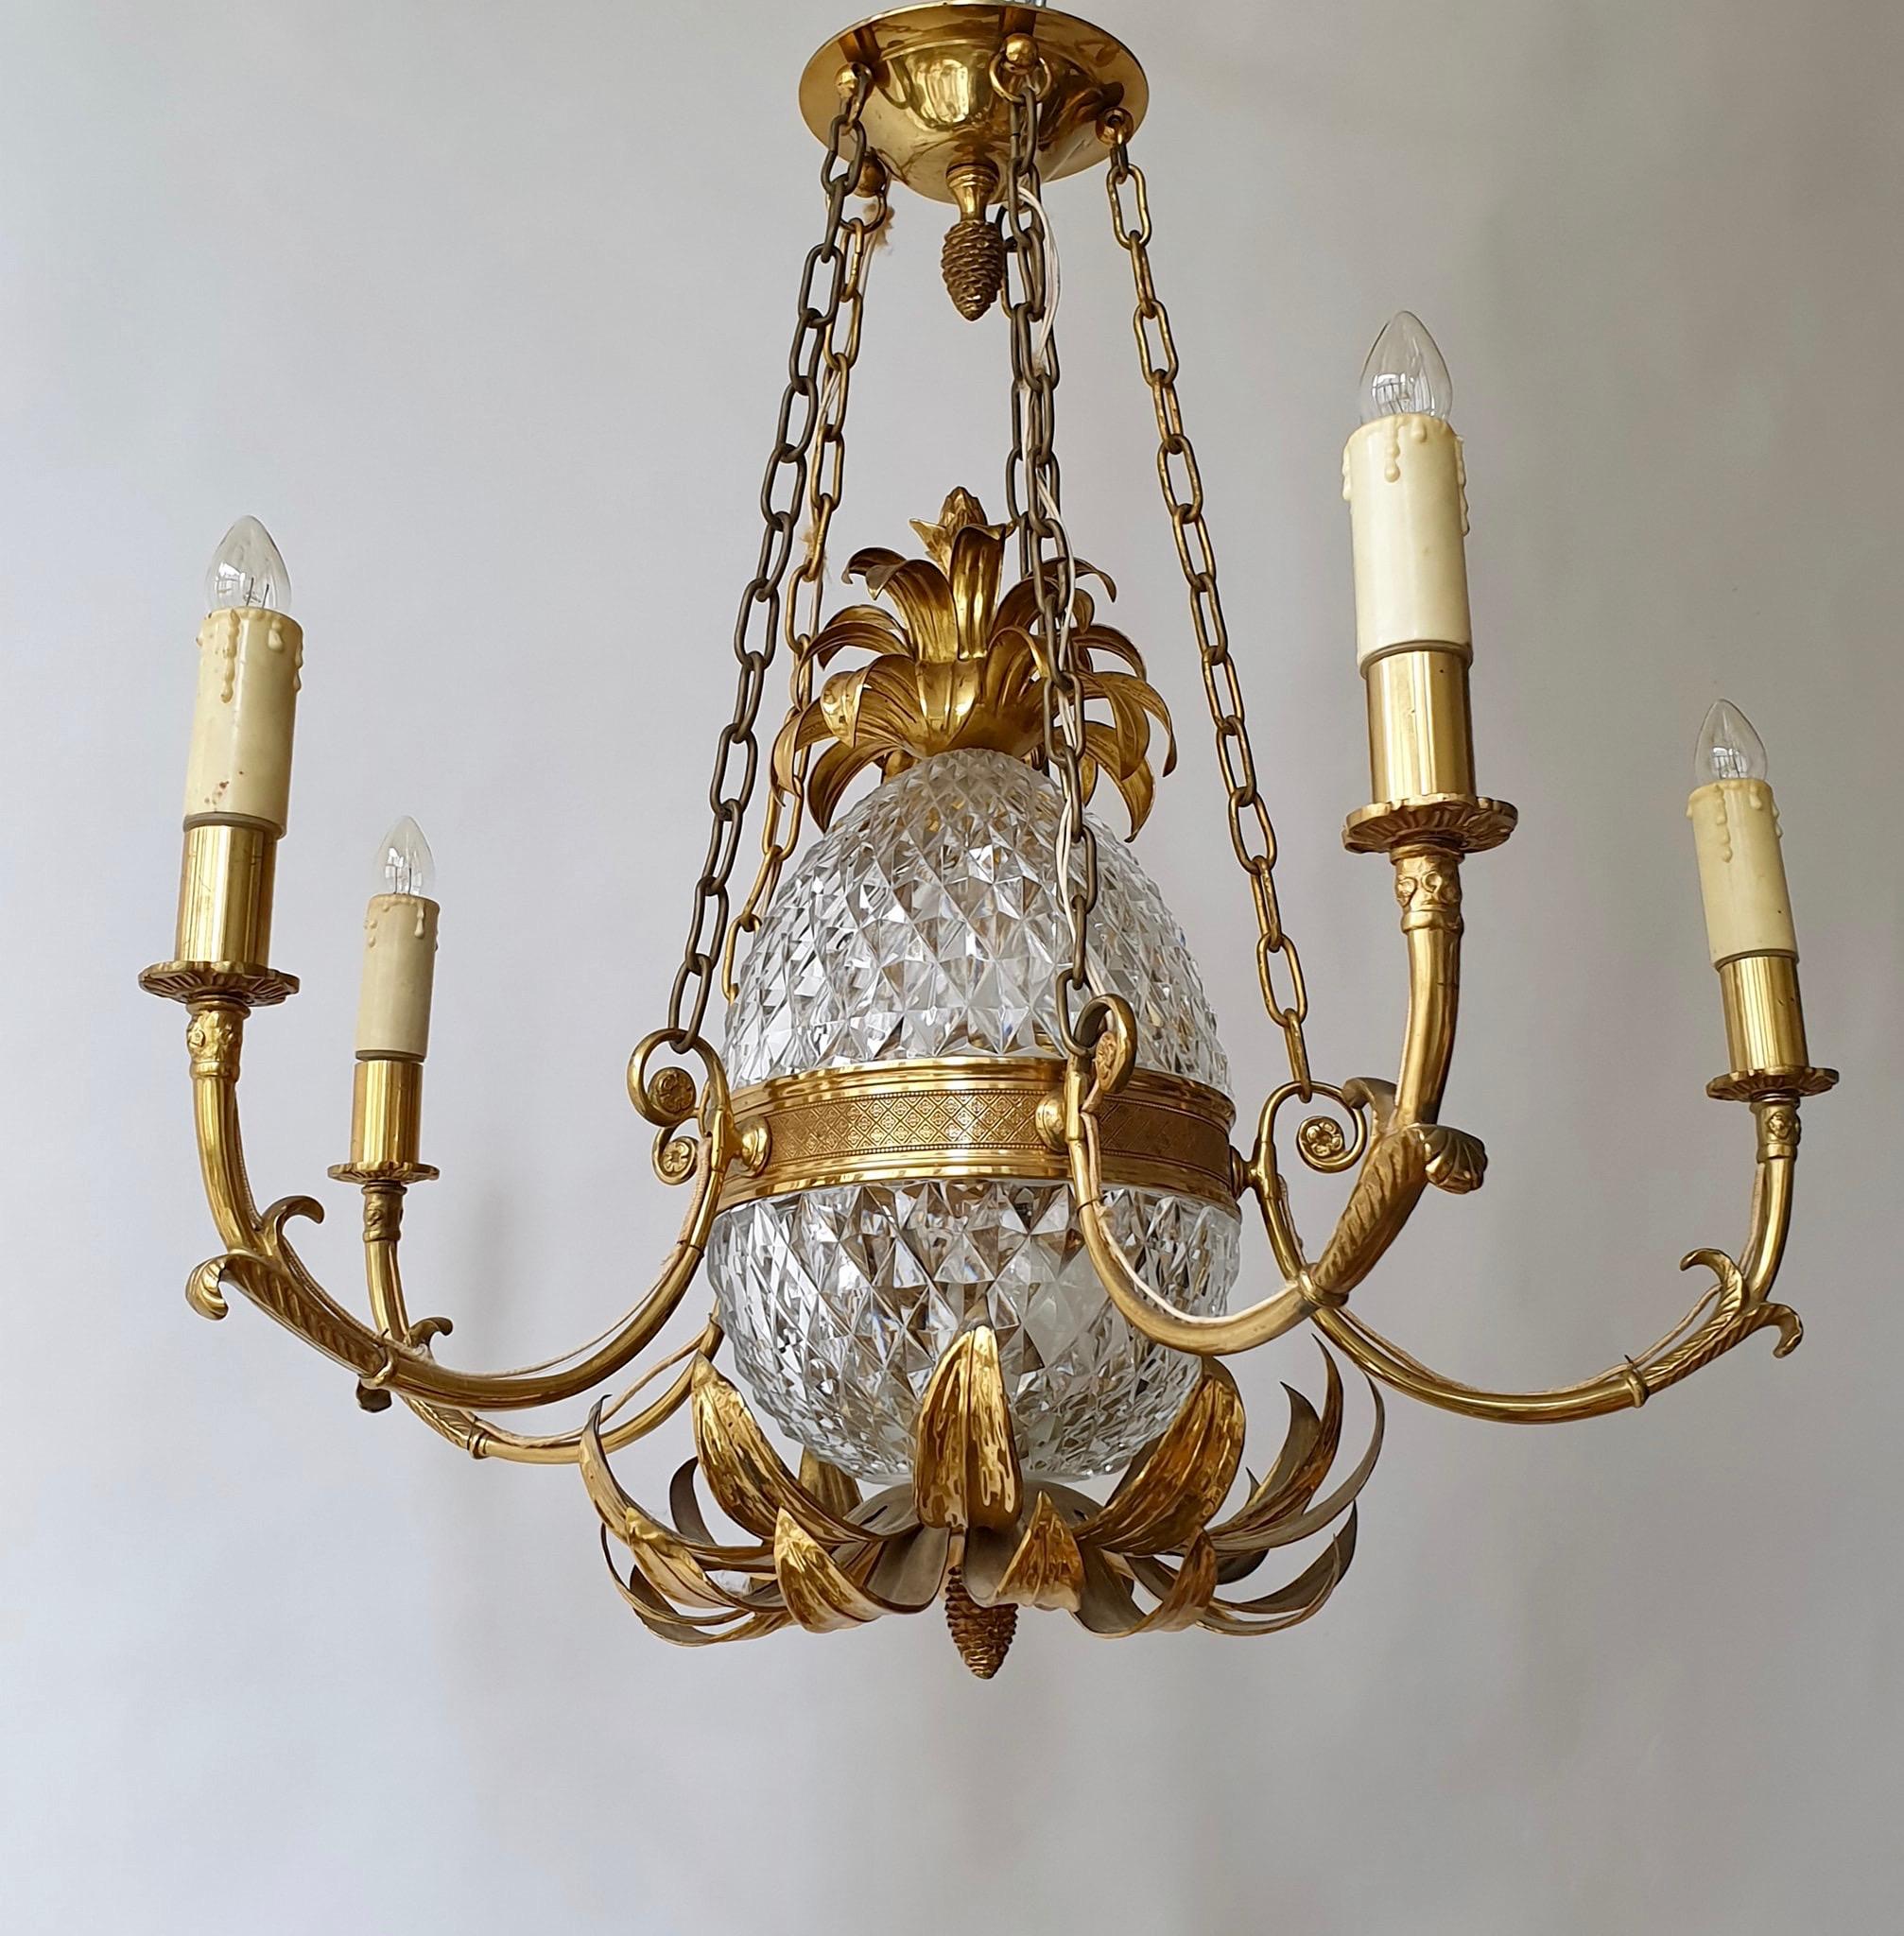 Gilt brass and cut crystal pineapple chandelier made in France, circa 1960-1970. It needs 7 x E14 standard screw bulbs to illuminate. After years this gorgeous chandelier stays in a very good to excellent original vintage condition with minor wear